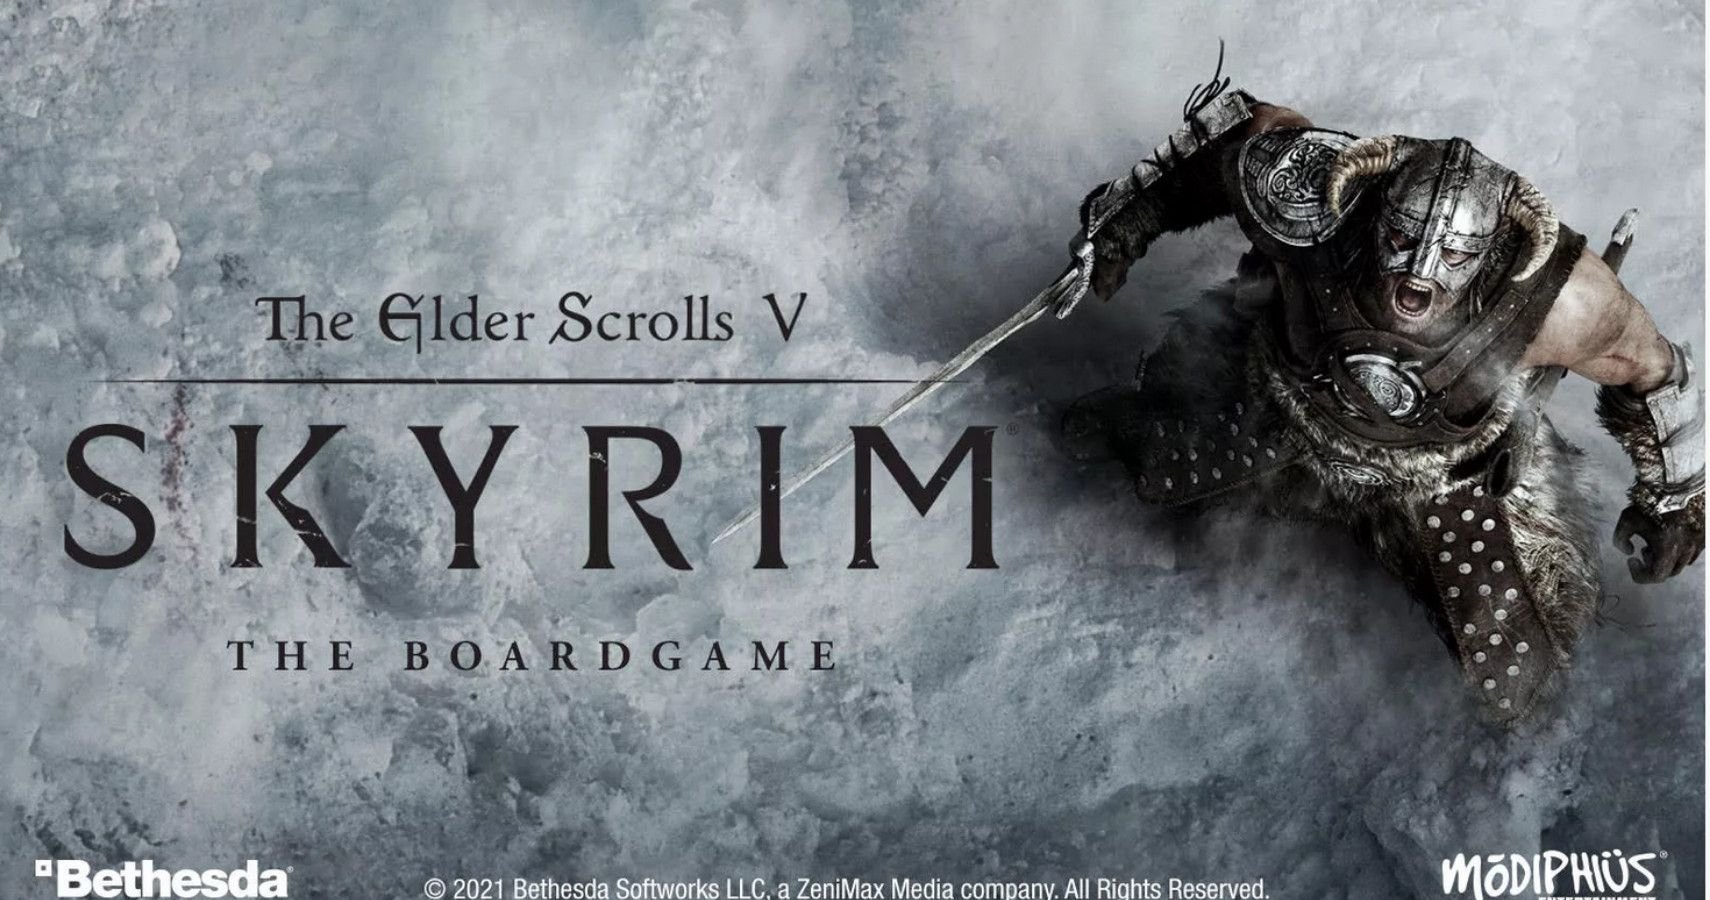 A Co-Op Skyrim Board Game Is Being Crowdfunded